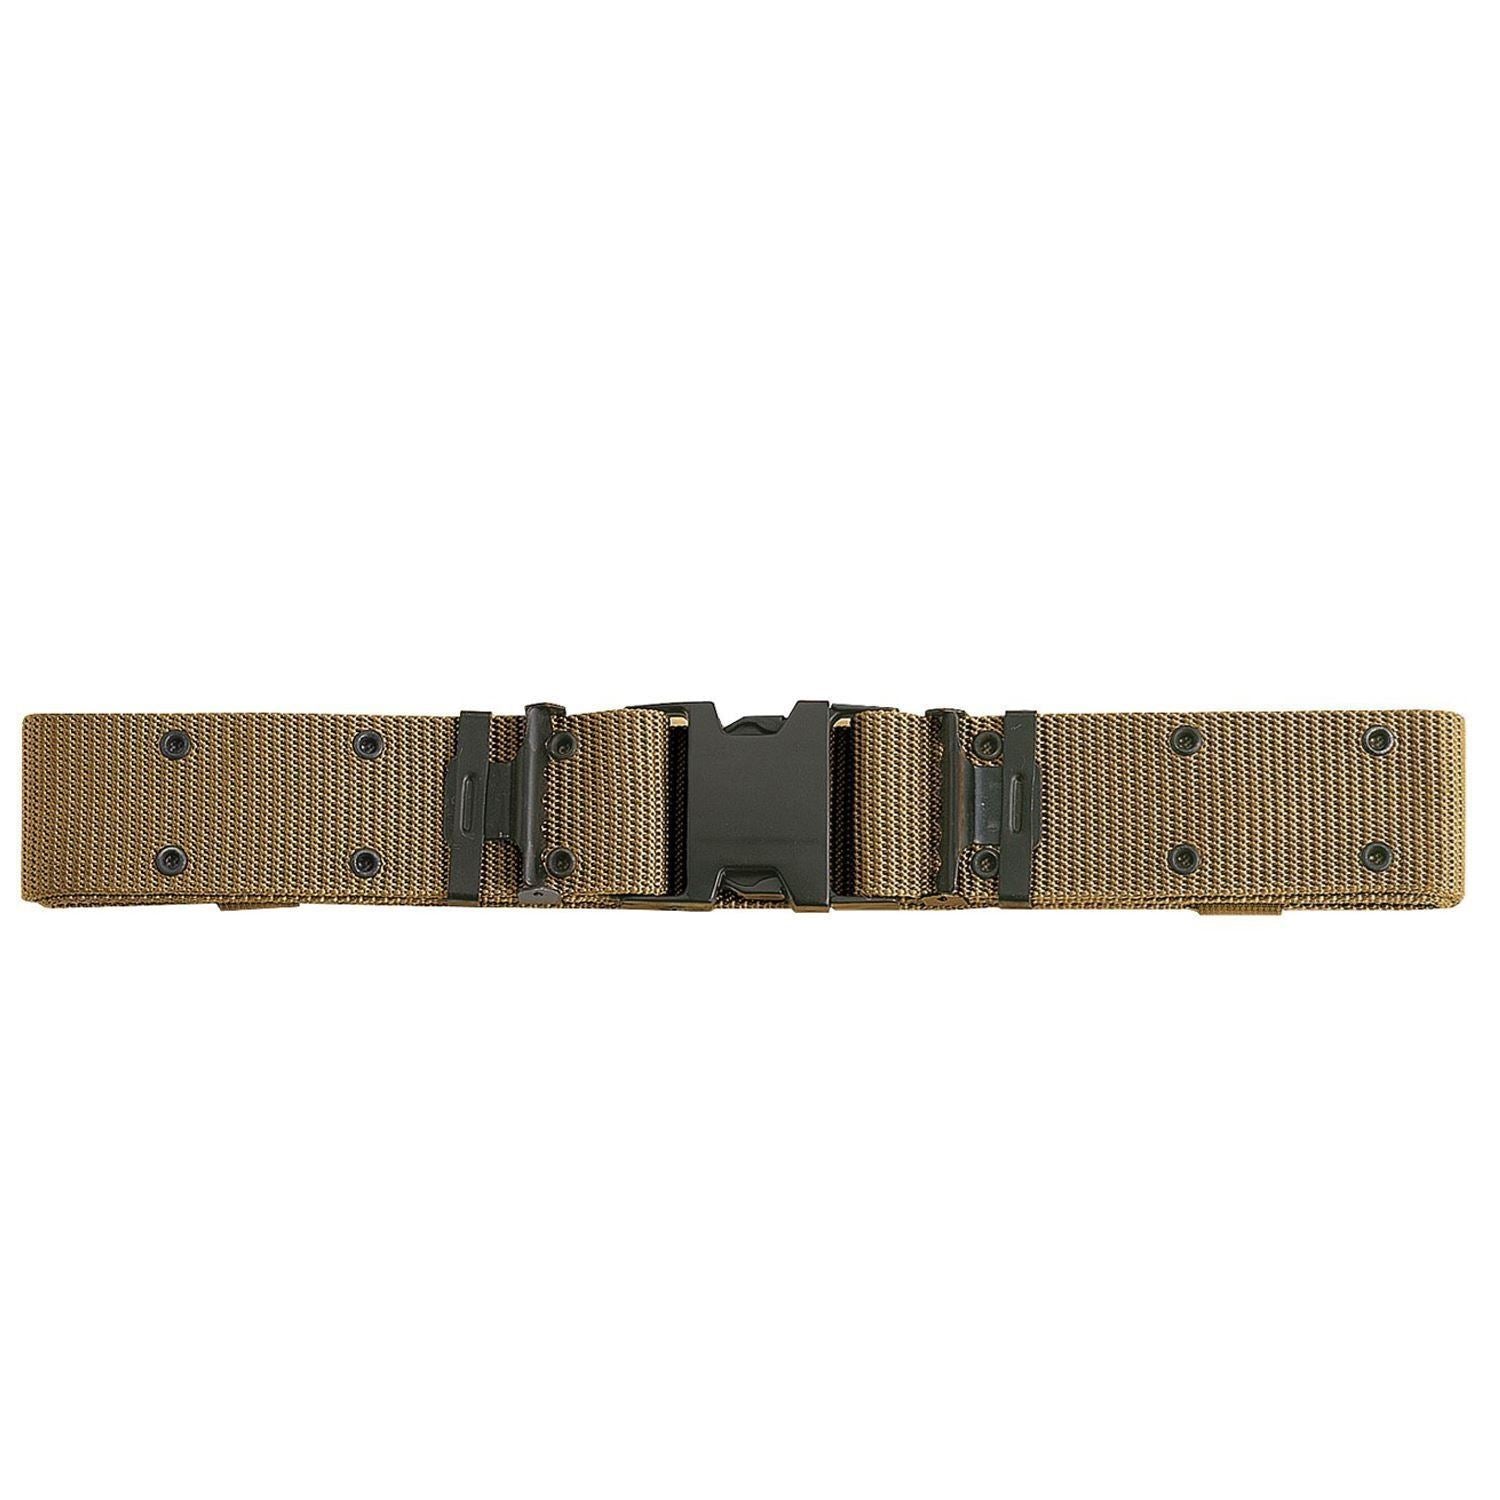 New Issue Marine Corps Style Quick Release Pistol Belts - Coyote Brown / Medium (5 per pack)